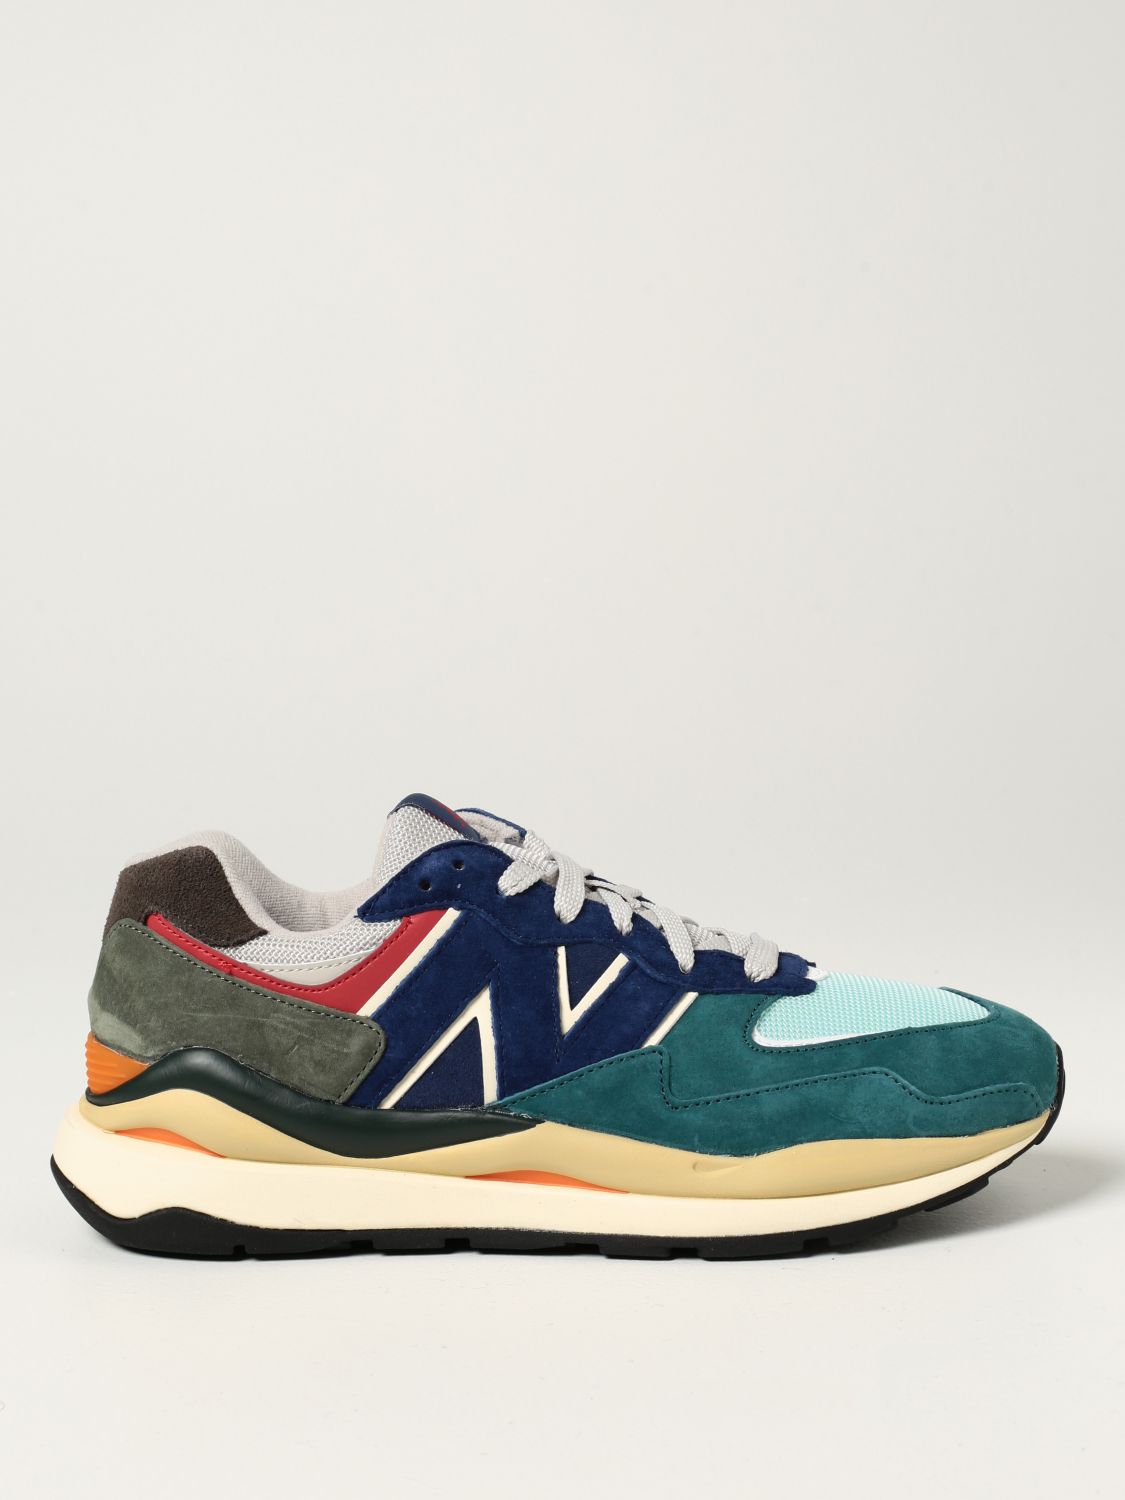 New Balance Outlet: Sneakers 57/40 in mesh e camoscio | Sneakers ... انواع الحفر